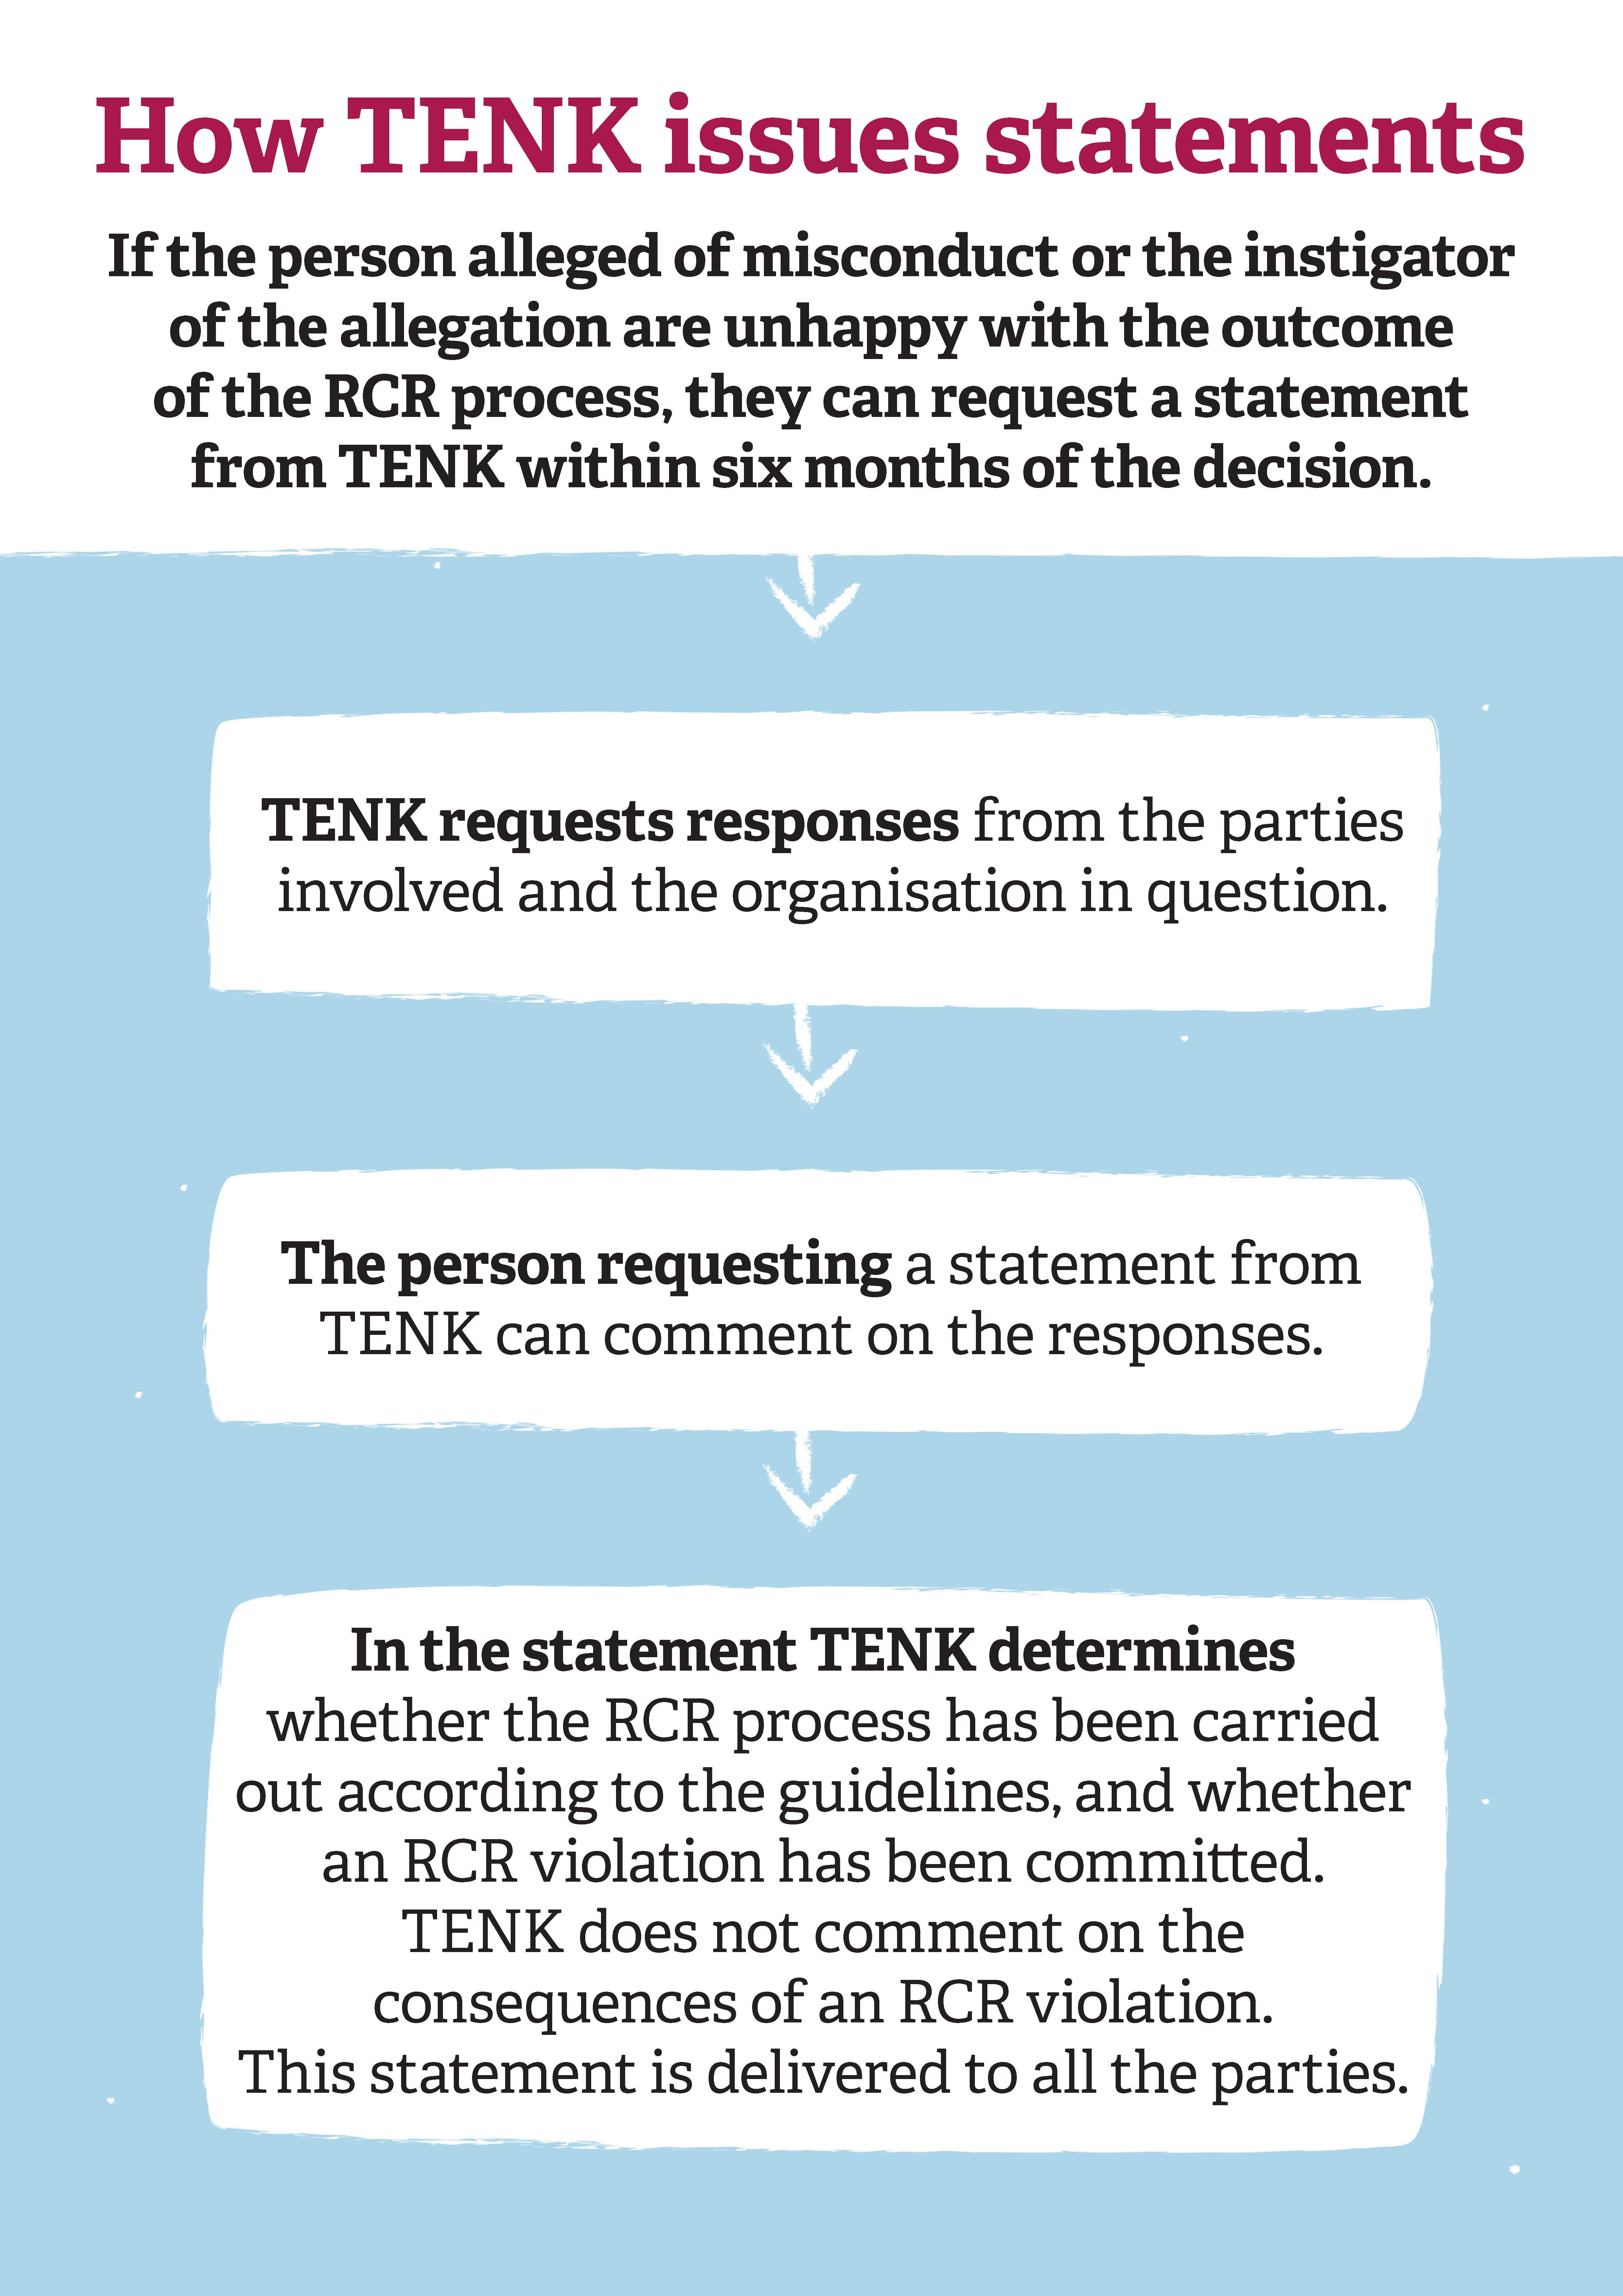 A shortened version of the TENK's statements' process described in the text